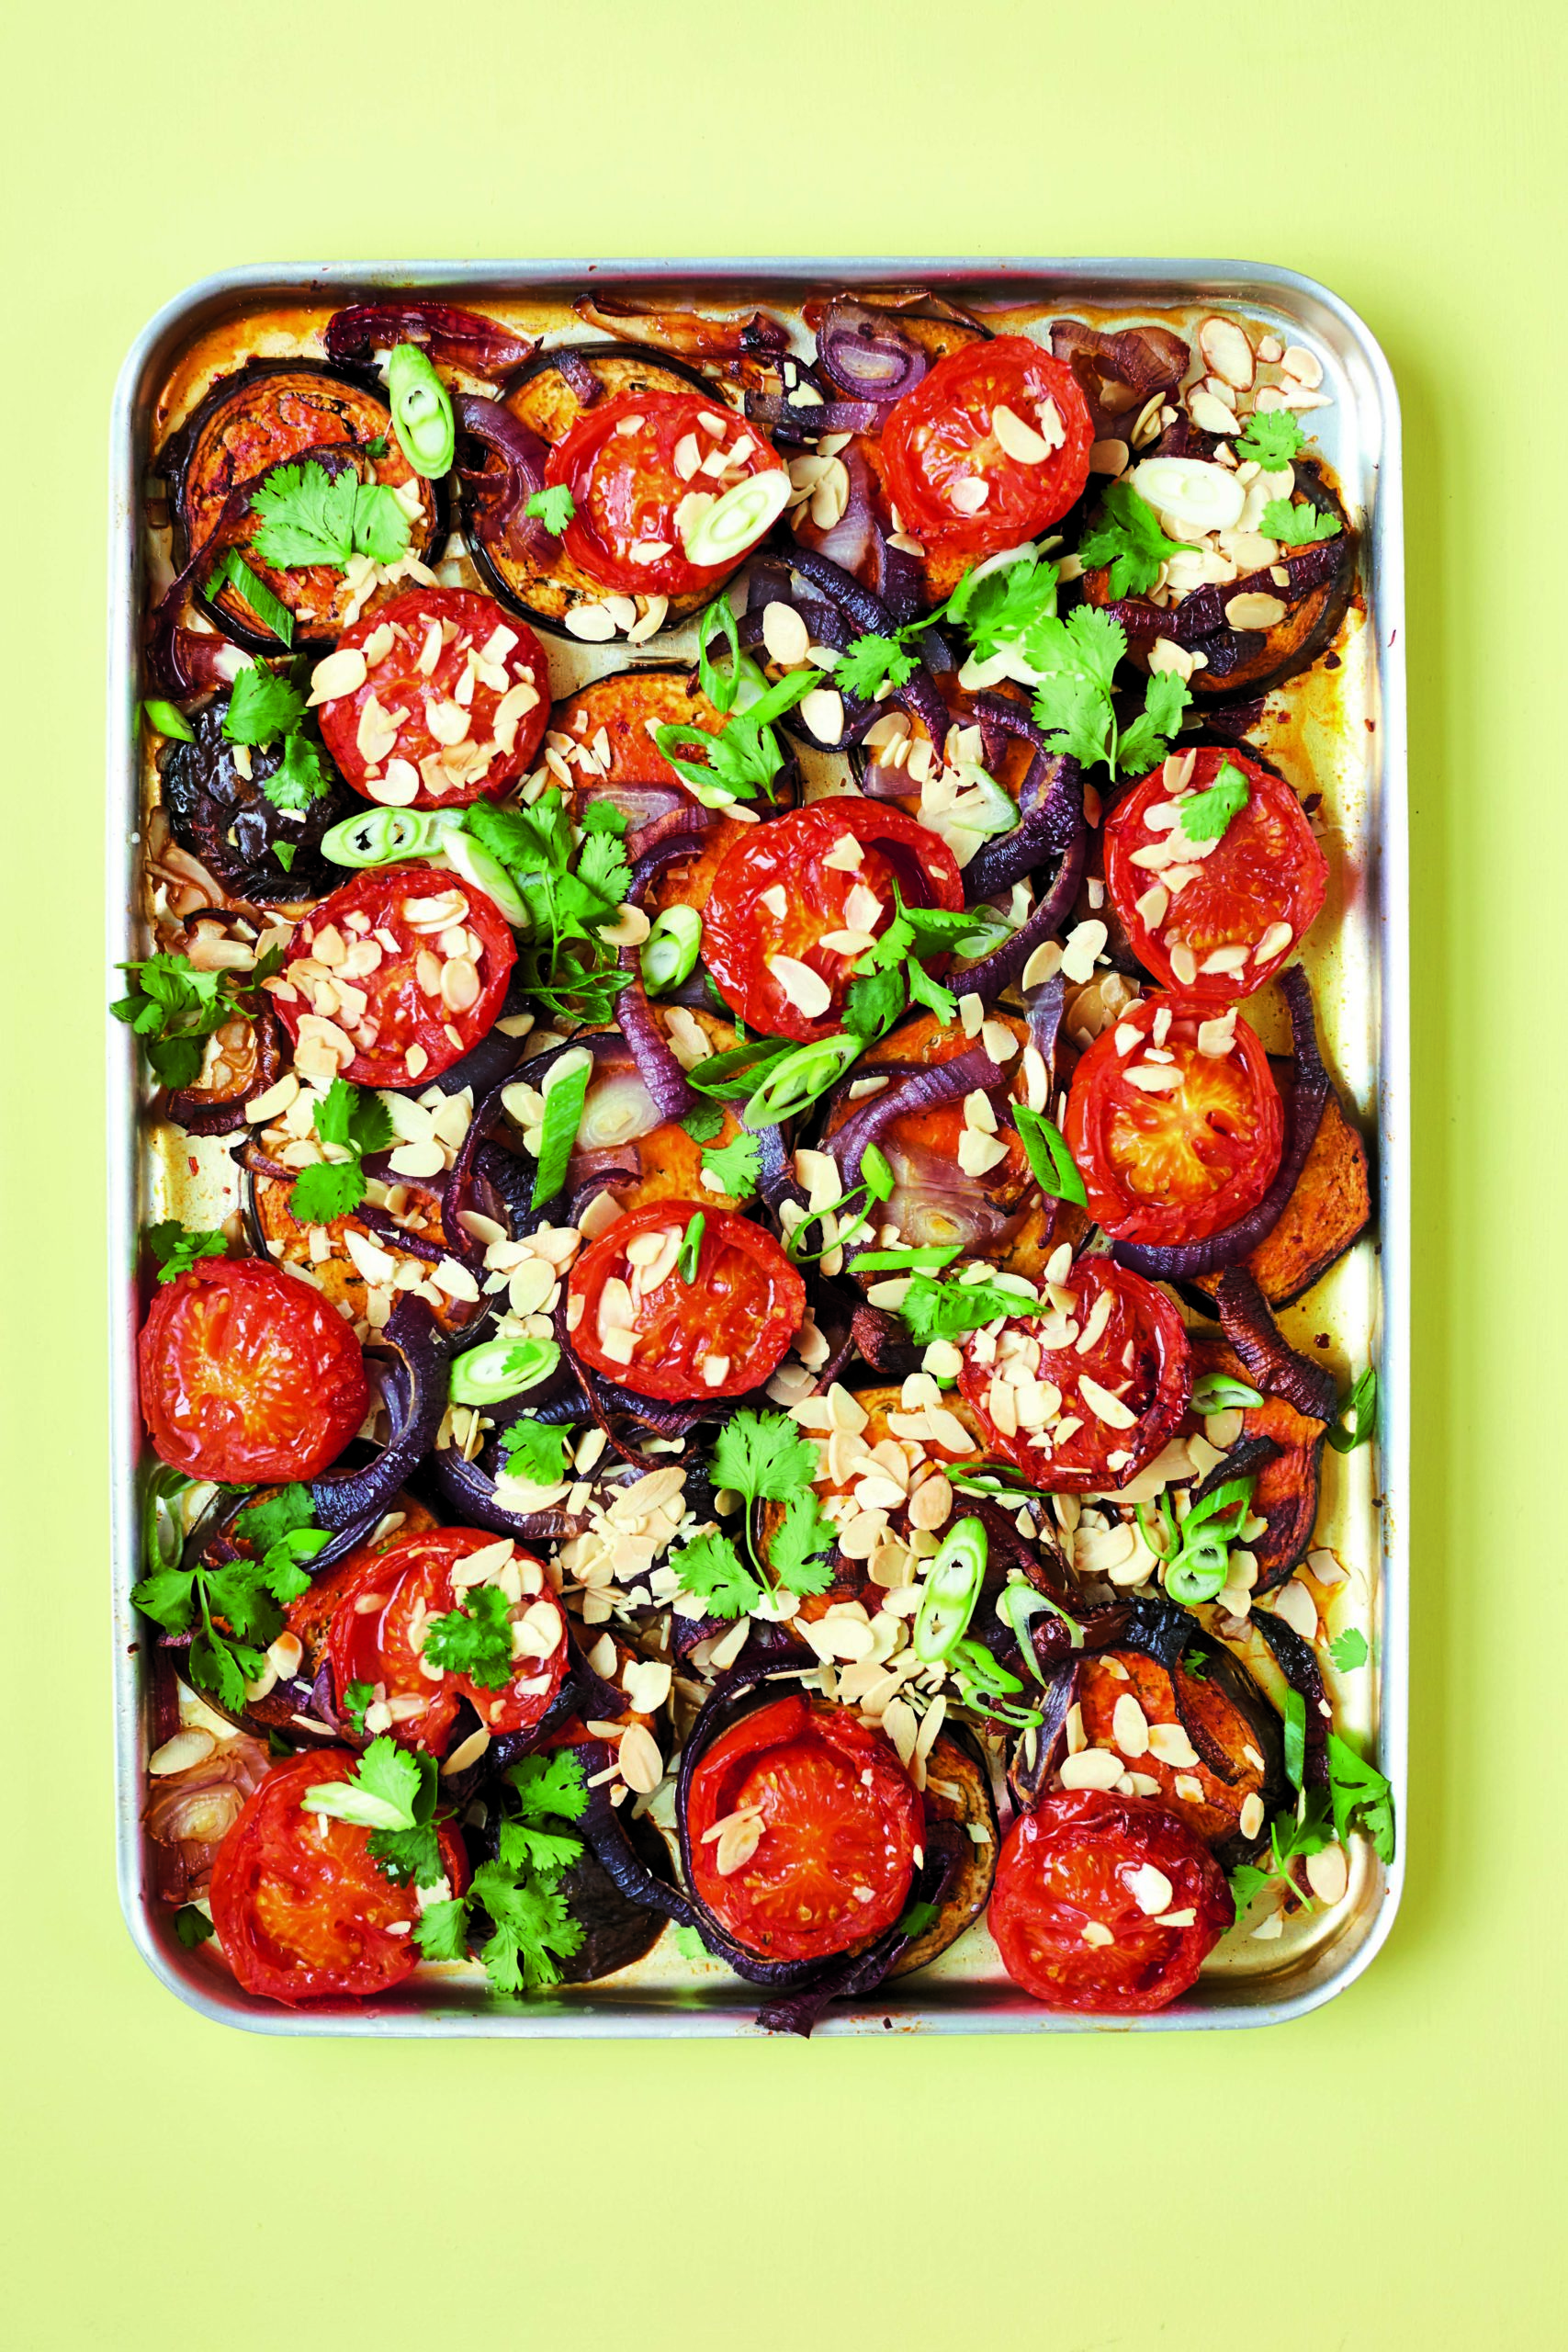 Aubergine With Tomatoes, Harissa and Almonds